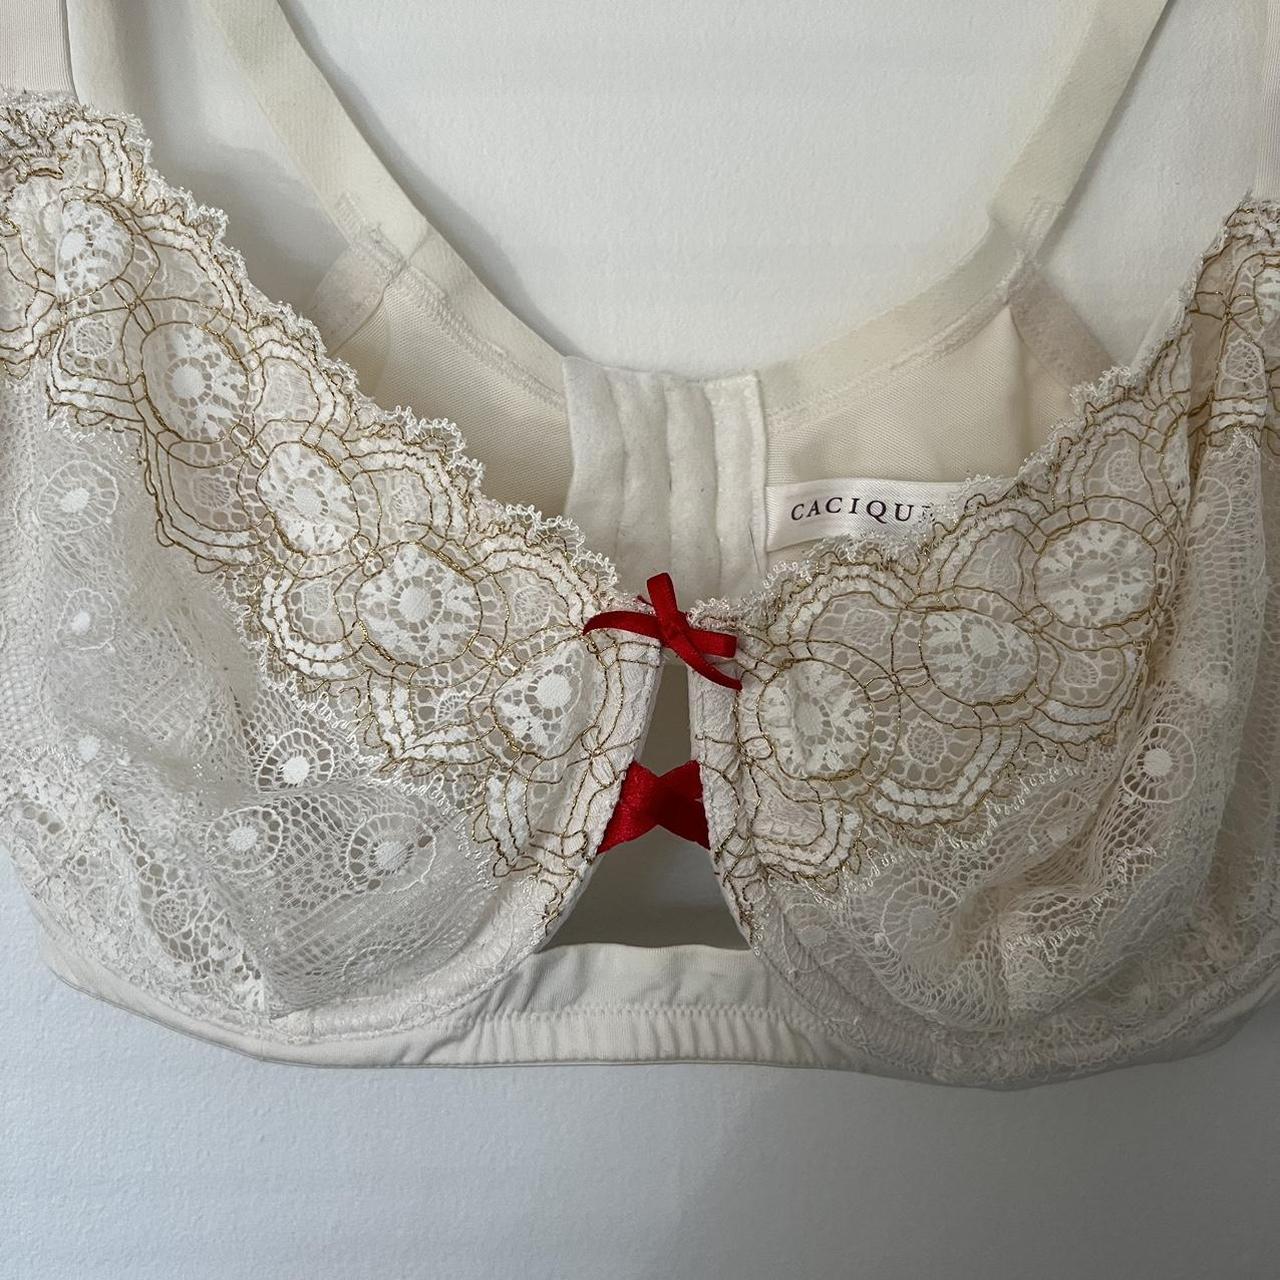 Cupid’s Bow Bra ️ Perfect for Valentine’s Day 💌... - Depop